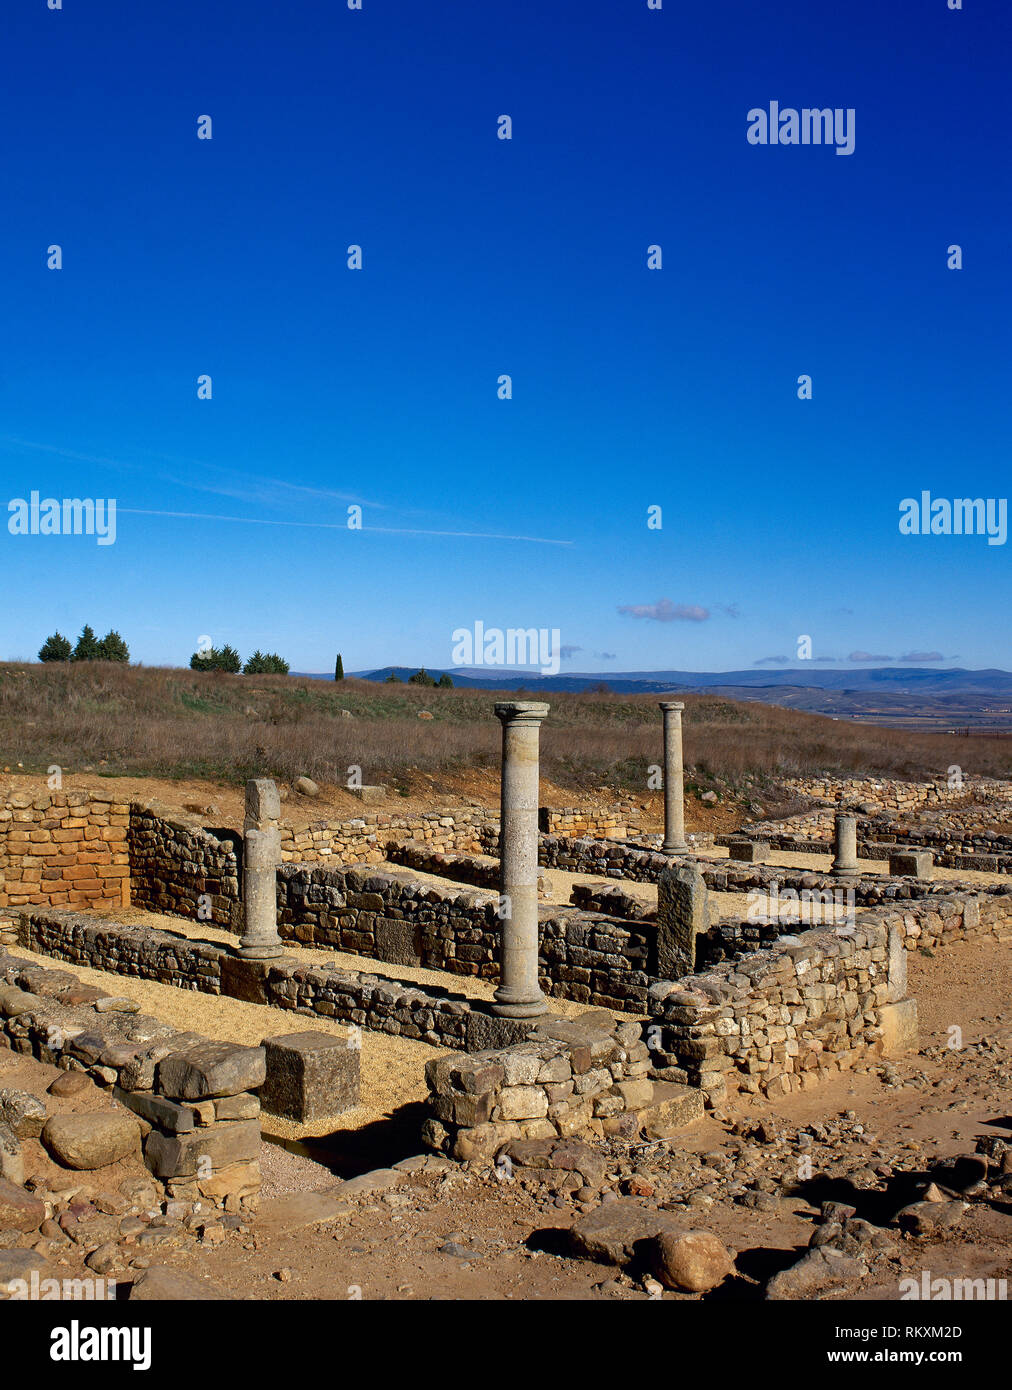 Spain. Numantia. Ancient Celtiberian town conquested by the Romans in 133 BC, during the Celtiberian Wars. It was abandoned in the 4th century AD. Panoramic of the ruins of houses with arcaded courtyards. Garray, province of Soria, Castile and Leon. Stock Photo